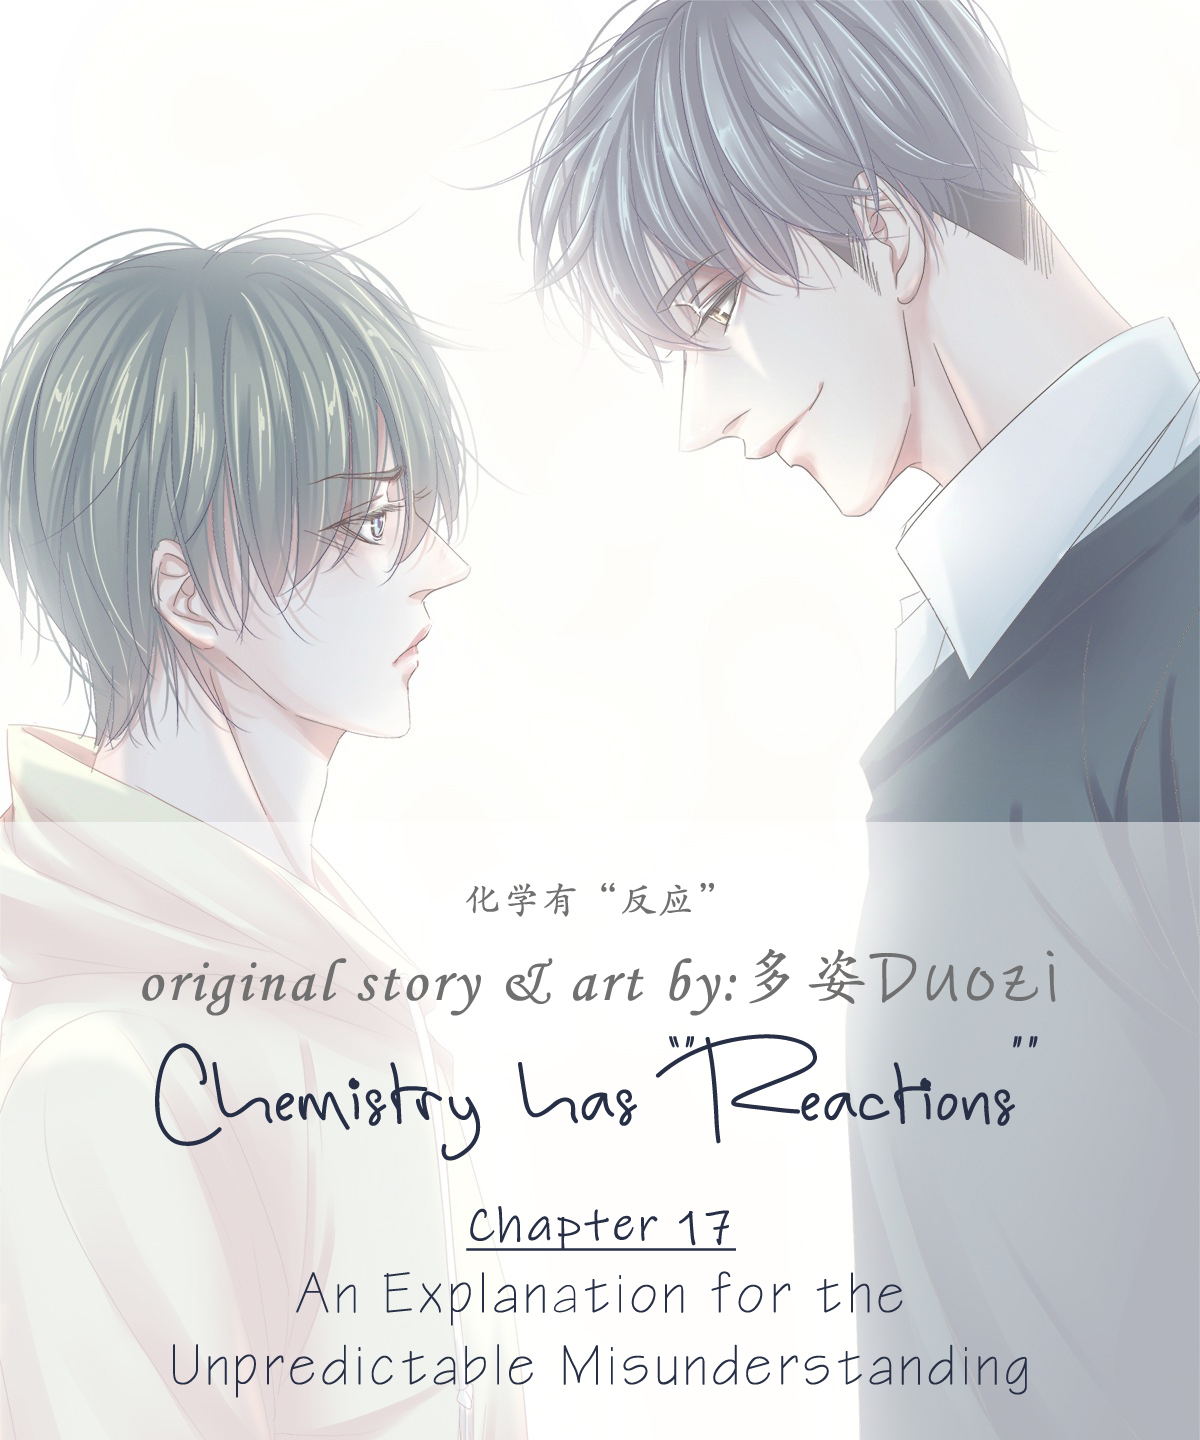 Chemistry has "Reactions" Vol. 1 Ch. 17